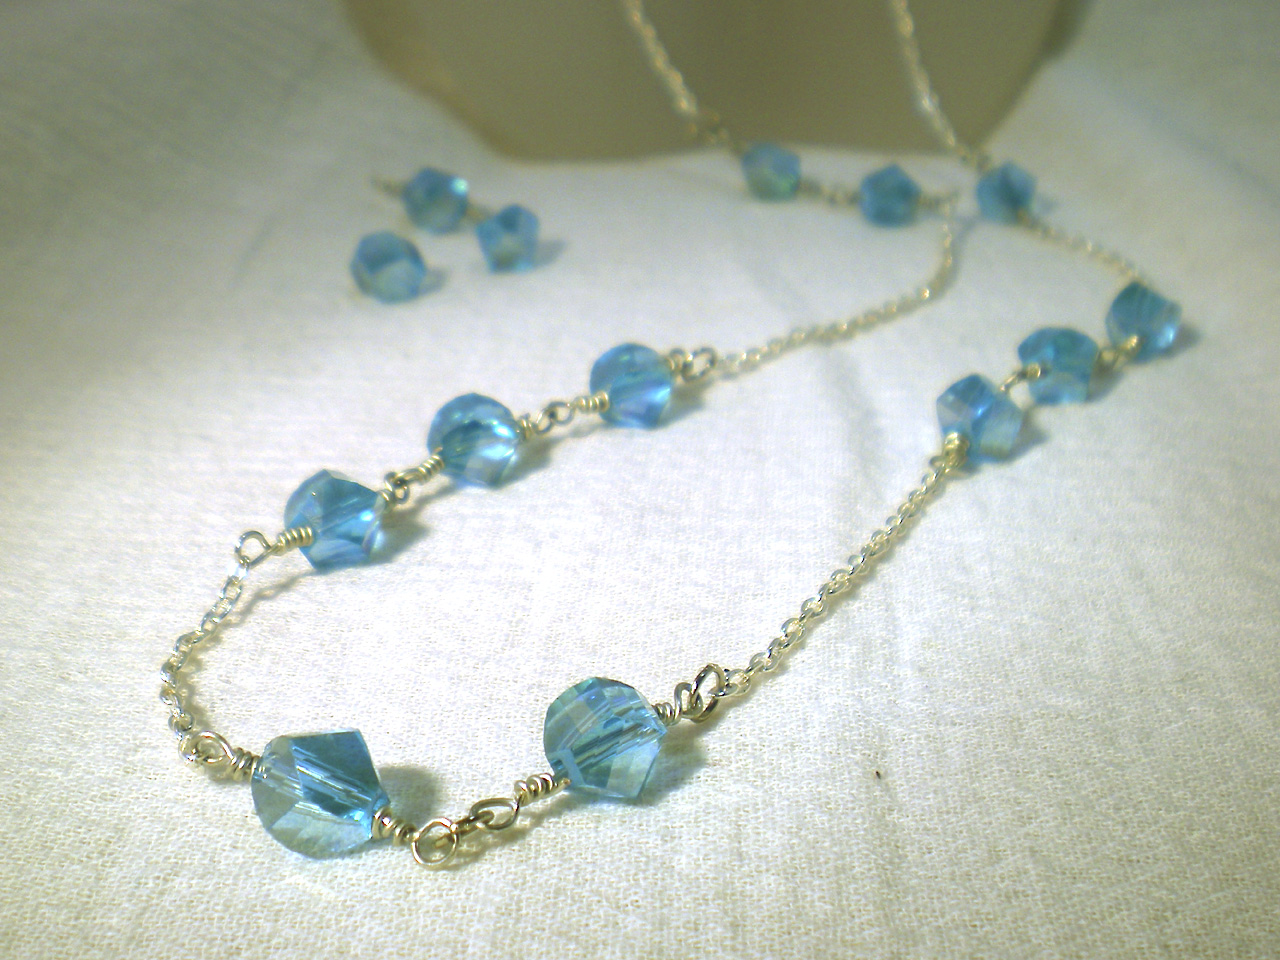 crystal-bead-and-wire-necklace-still-003